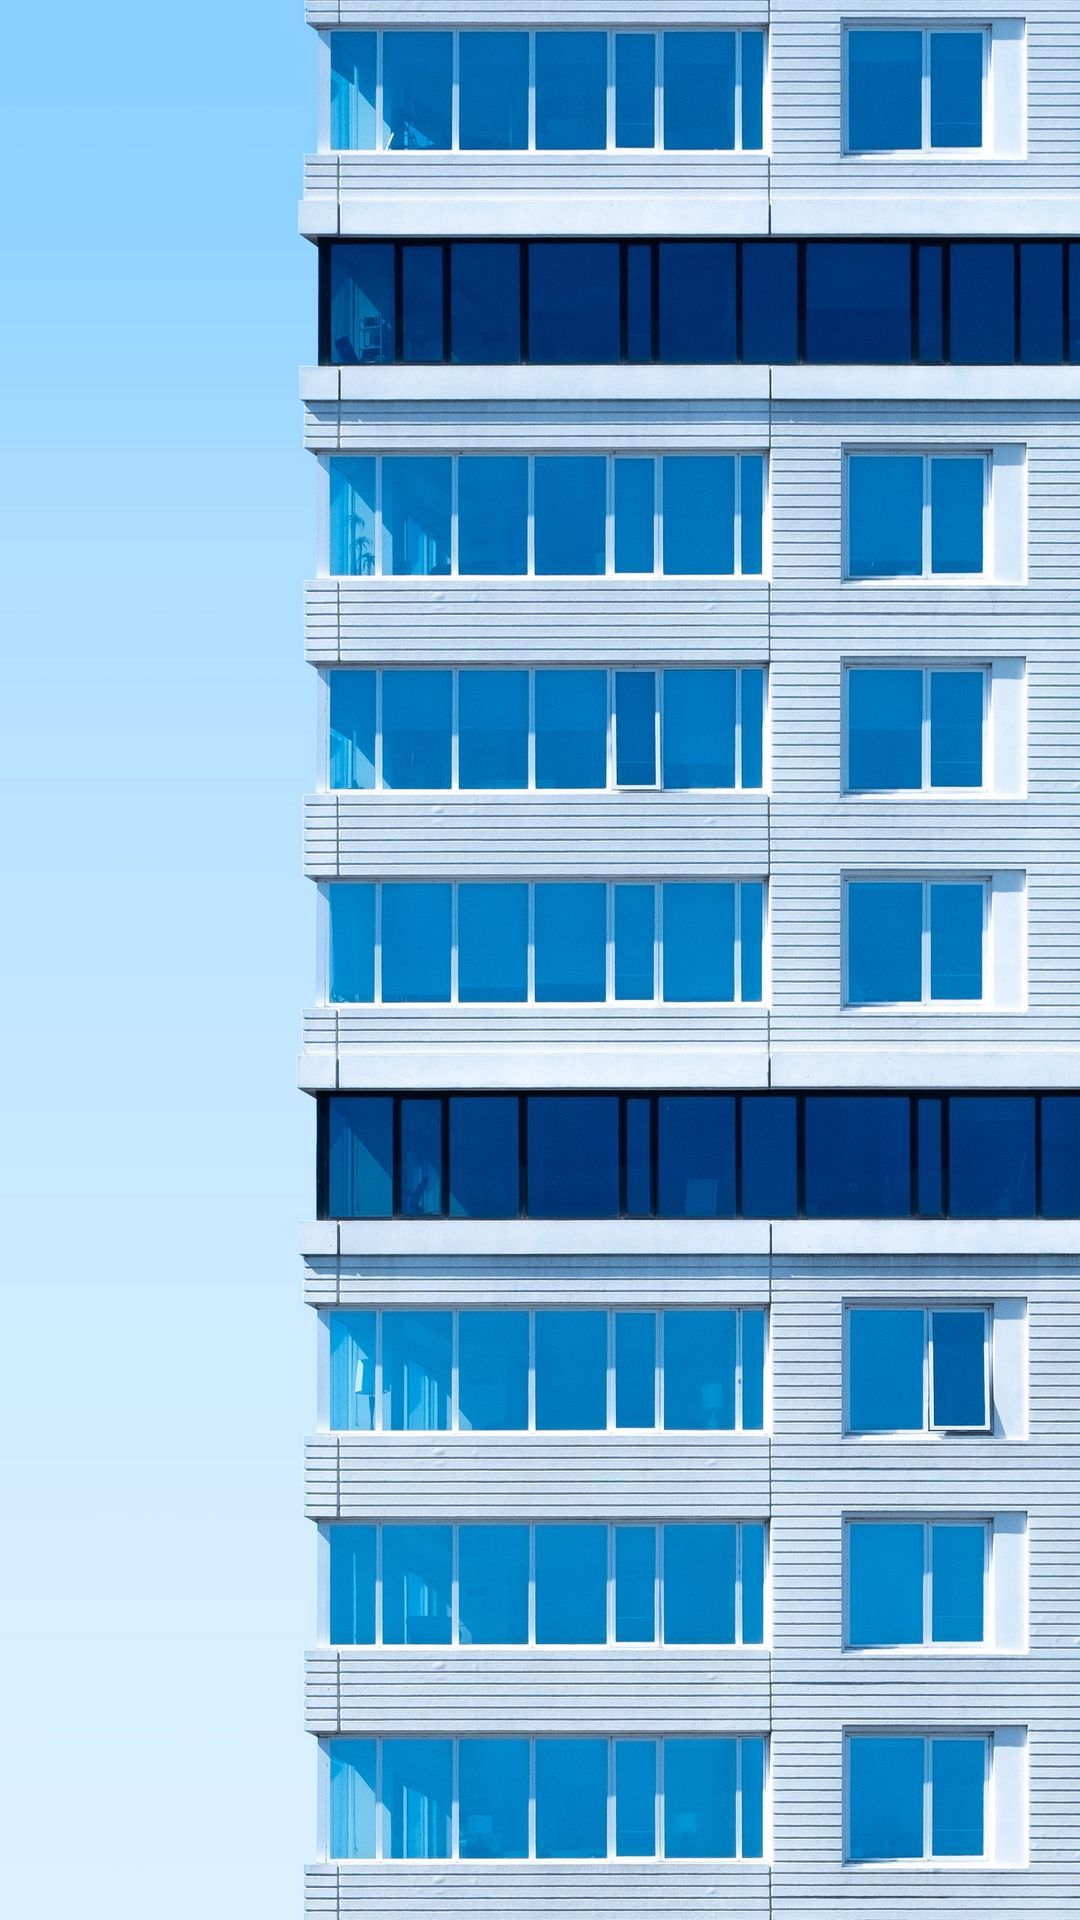 A tall white building with blue windows - Architecture